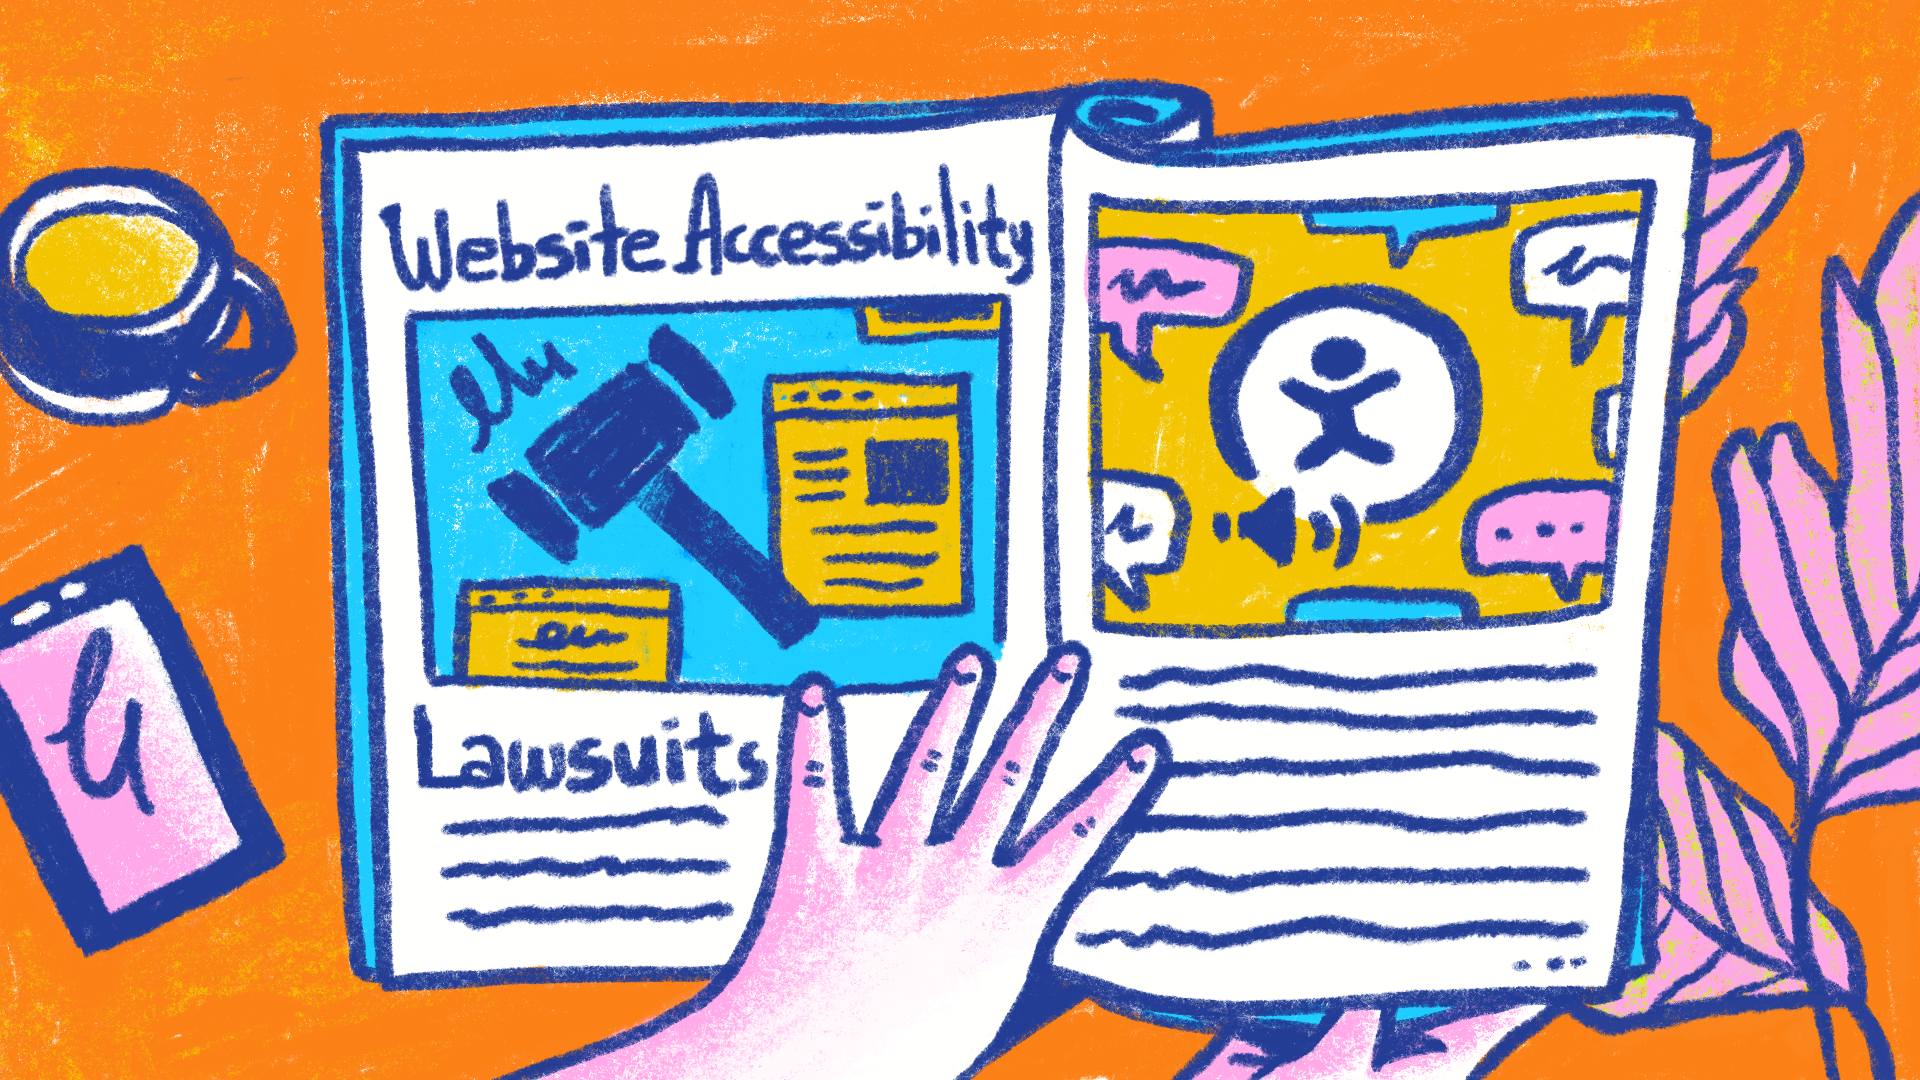 Illustration of magazine with a person's hand holding it open to an article on website accessibility lawsuits